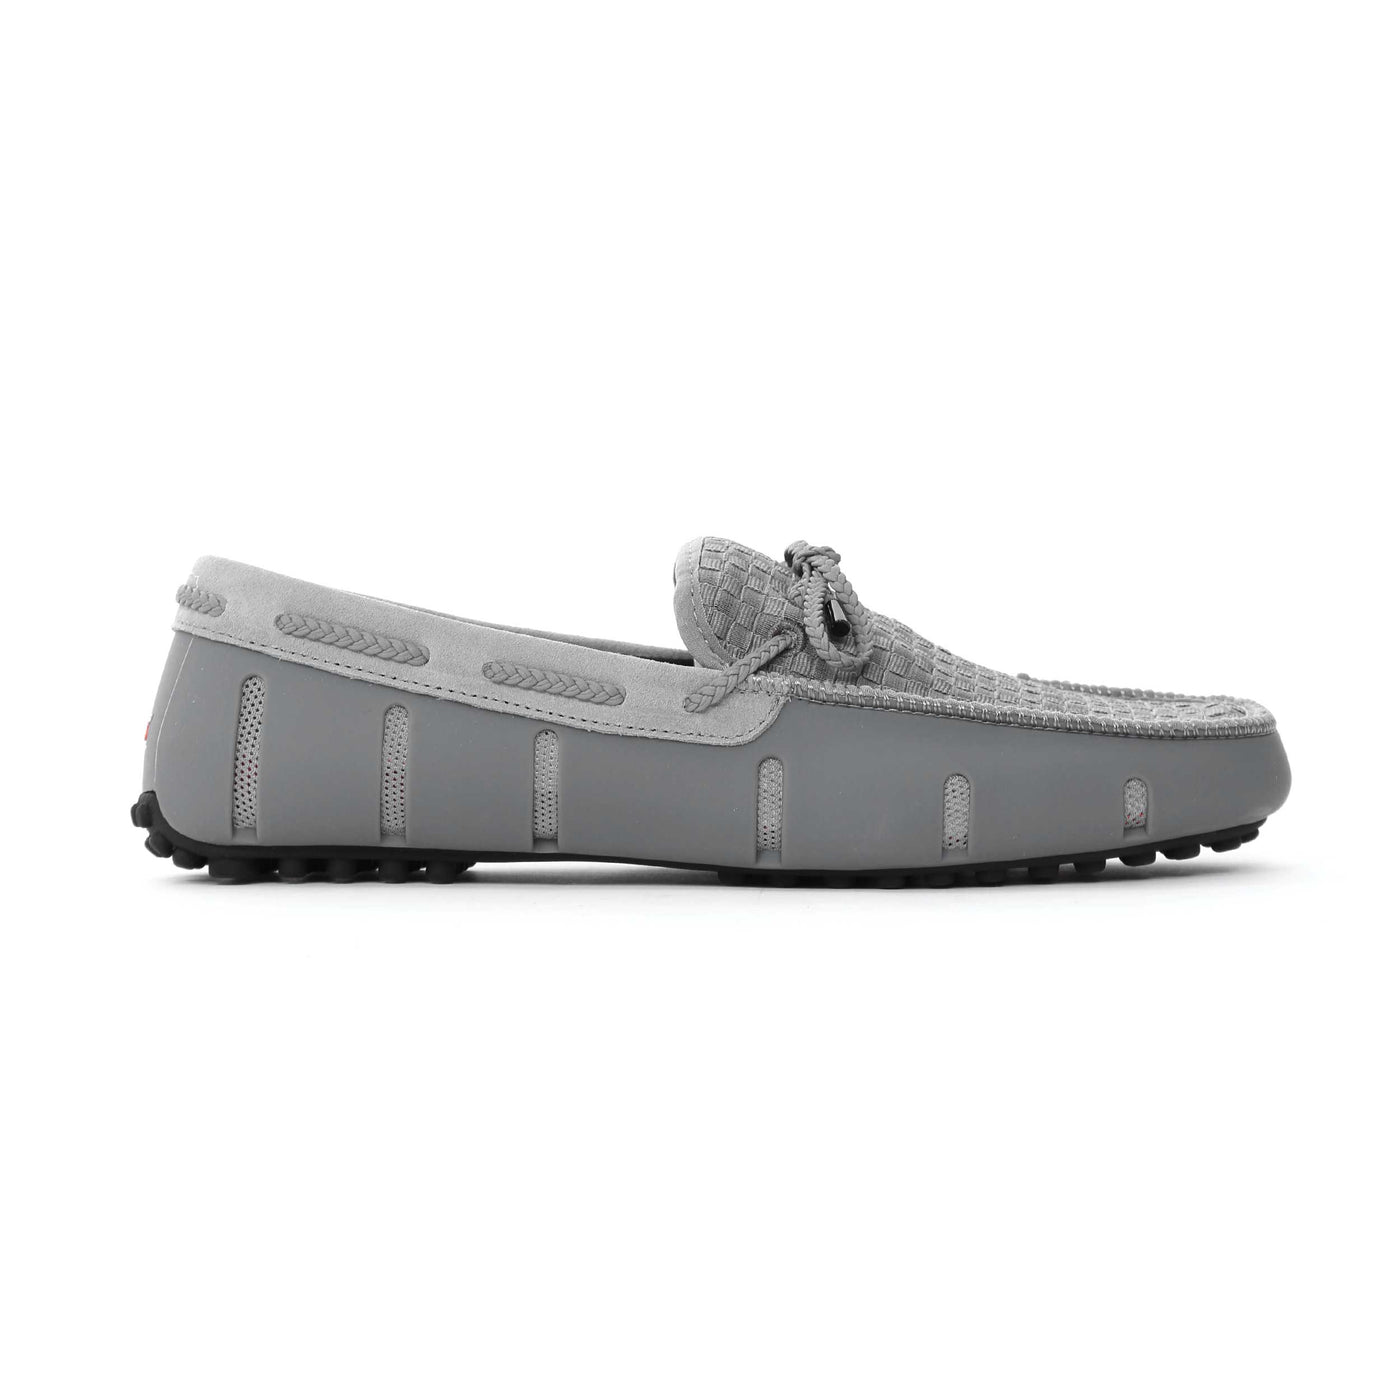 Swims Woven Driver Shoe in Grey